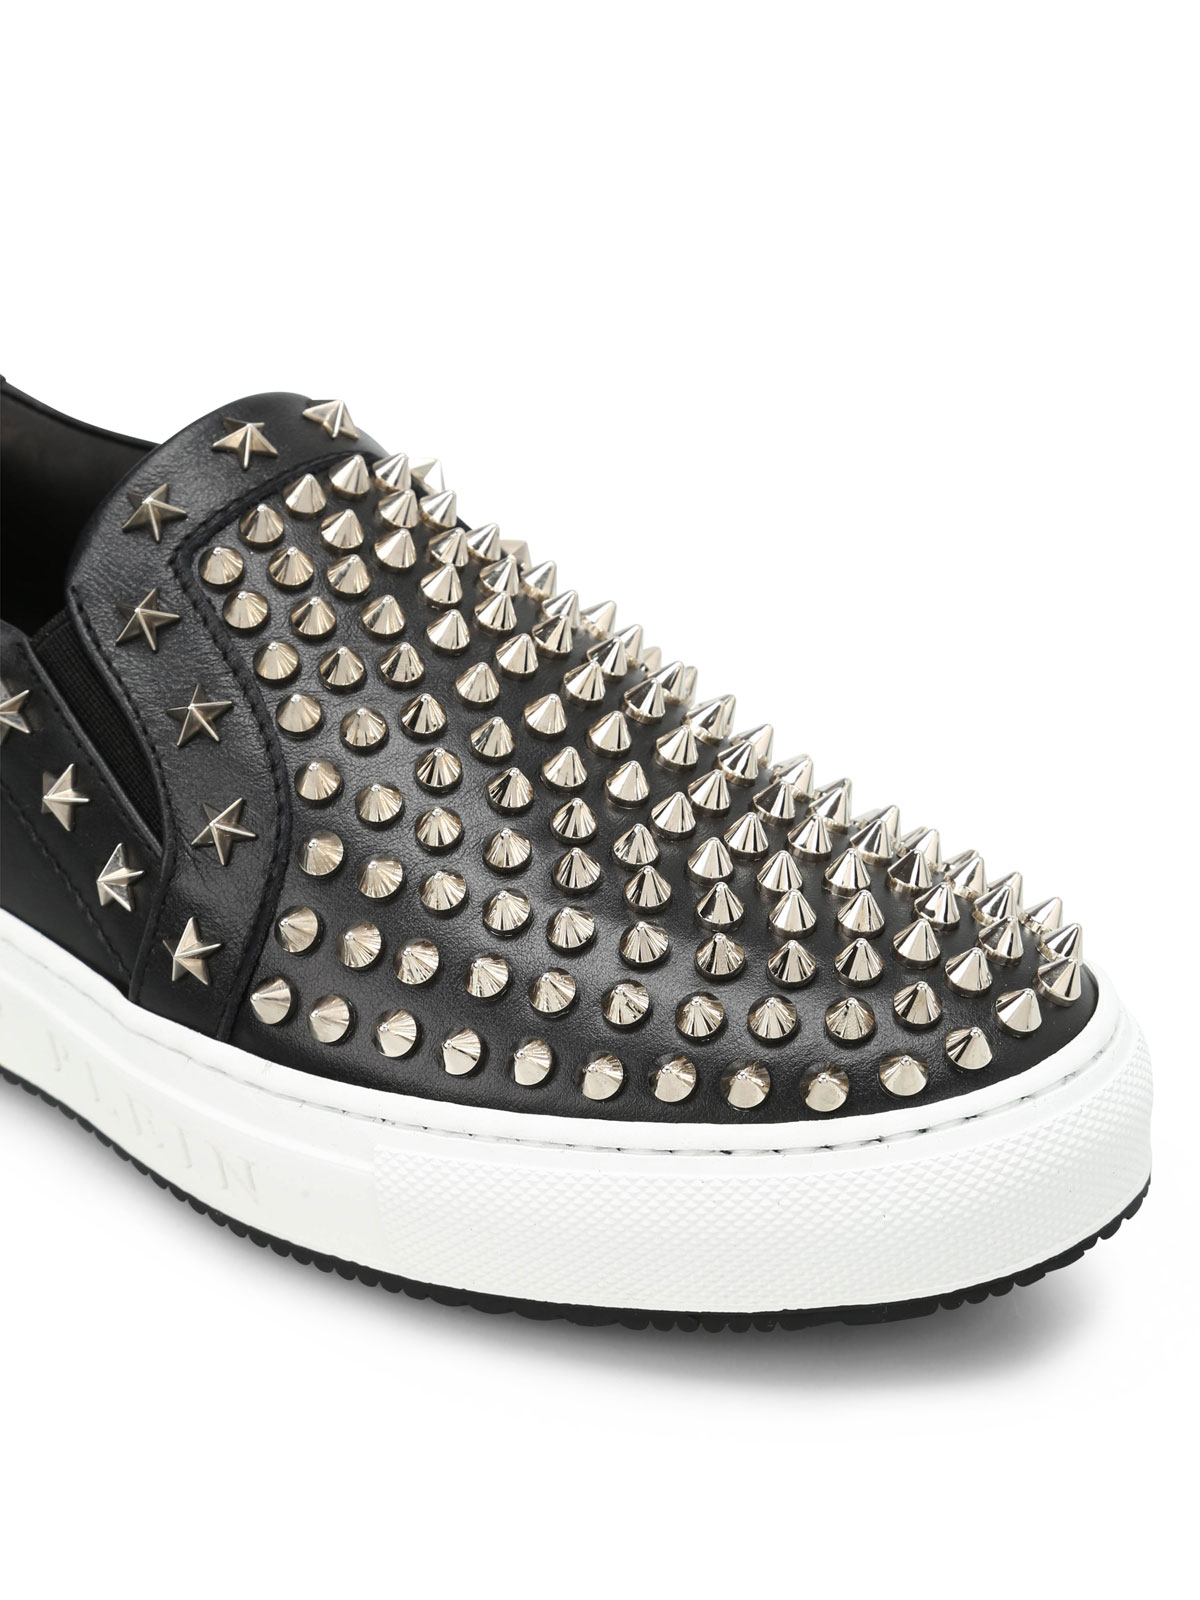 Philipp Plein Spike-Studded Leather High-Top Sneakers in Black for